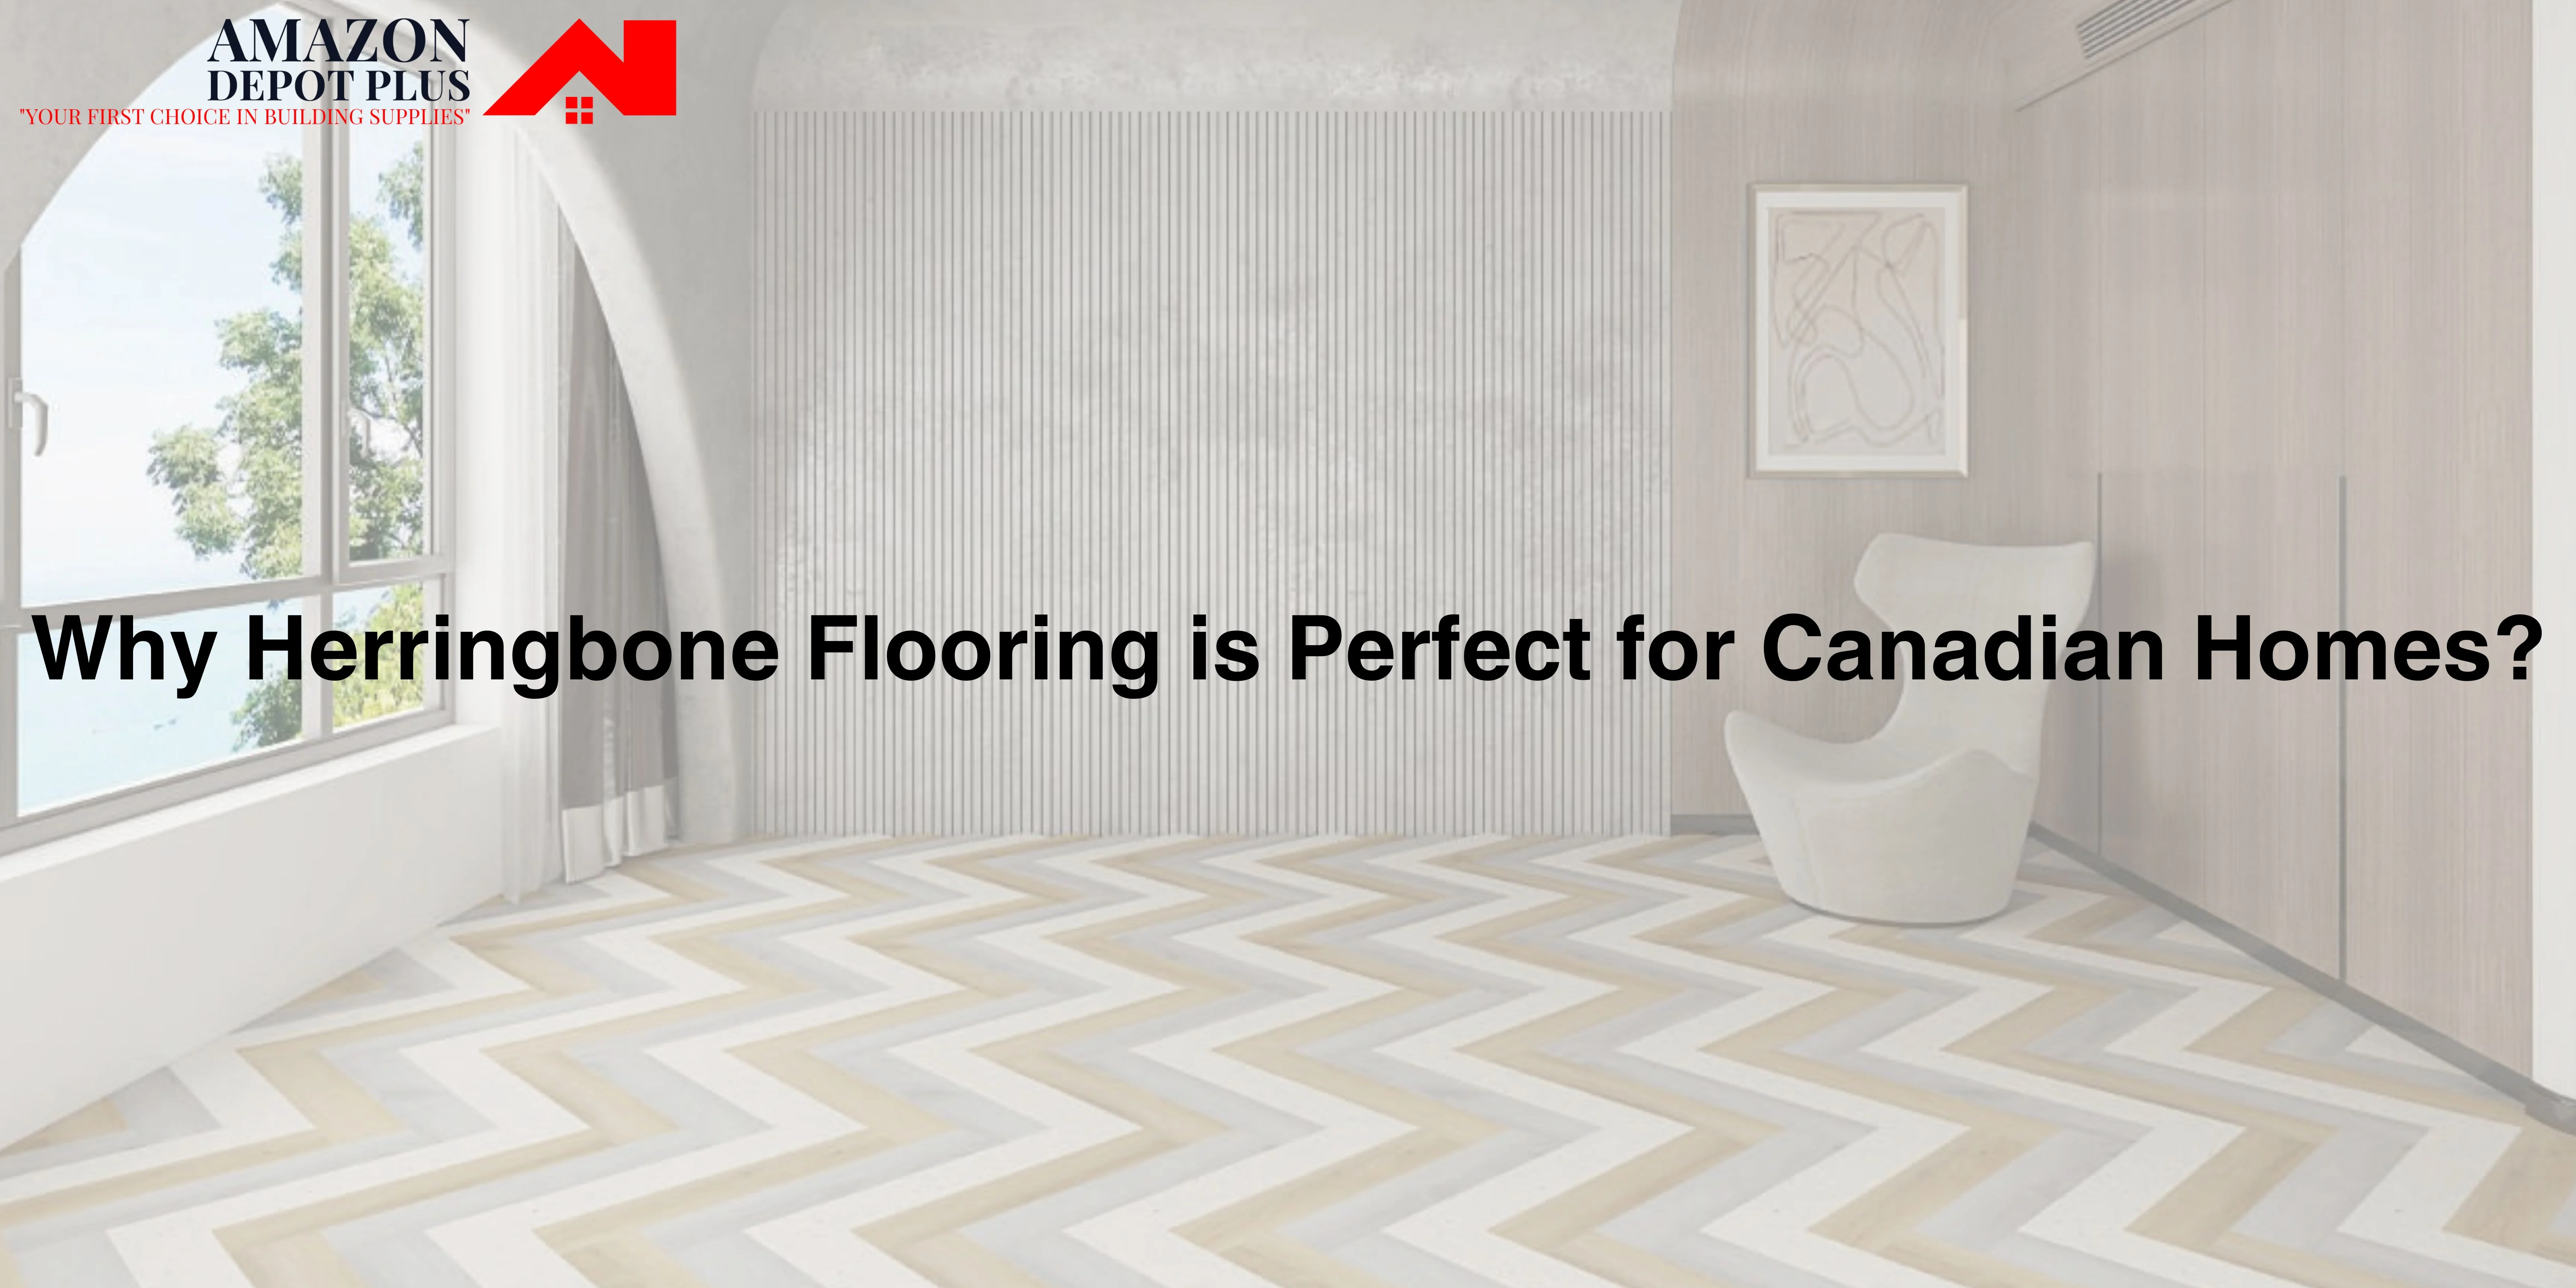 Why Herringbone Flooring is Perfect for Canadian Homes?